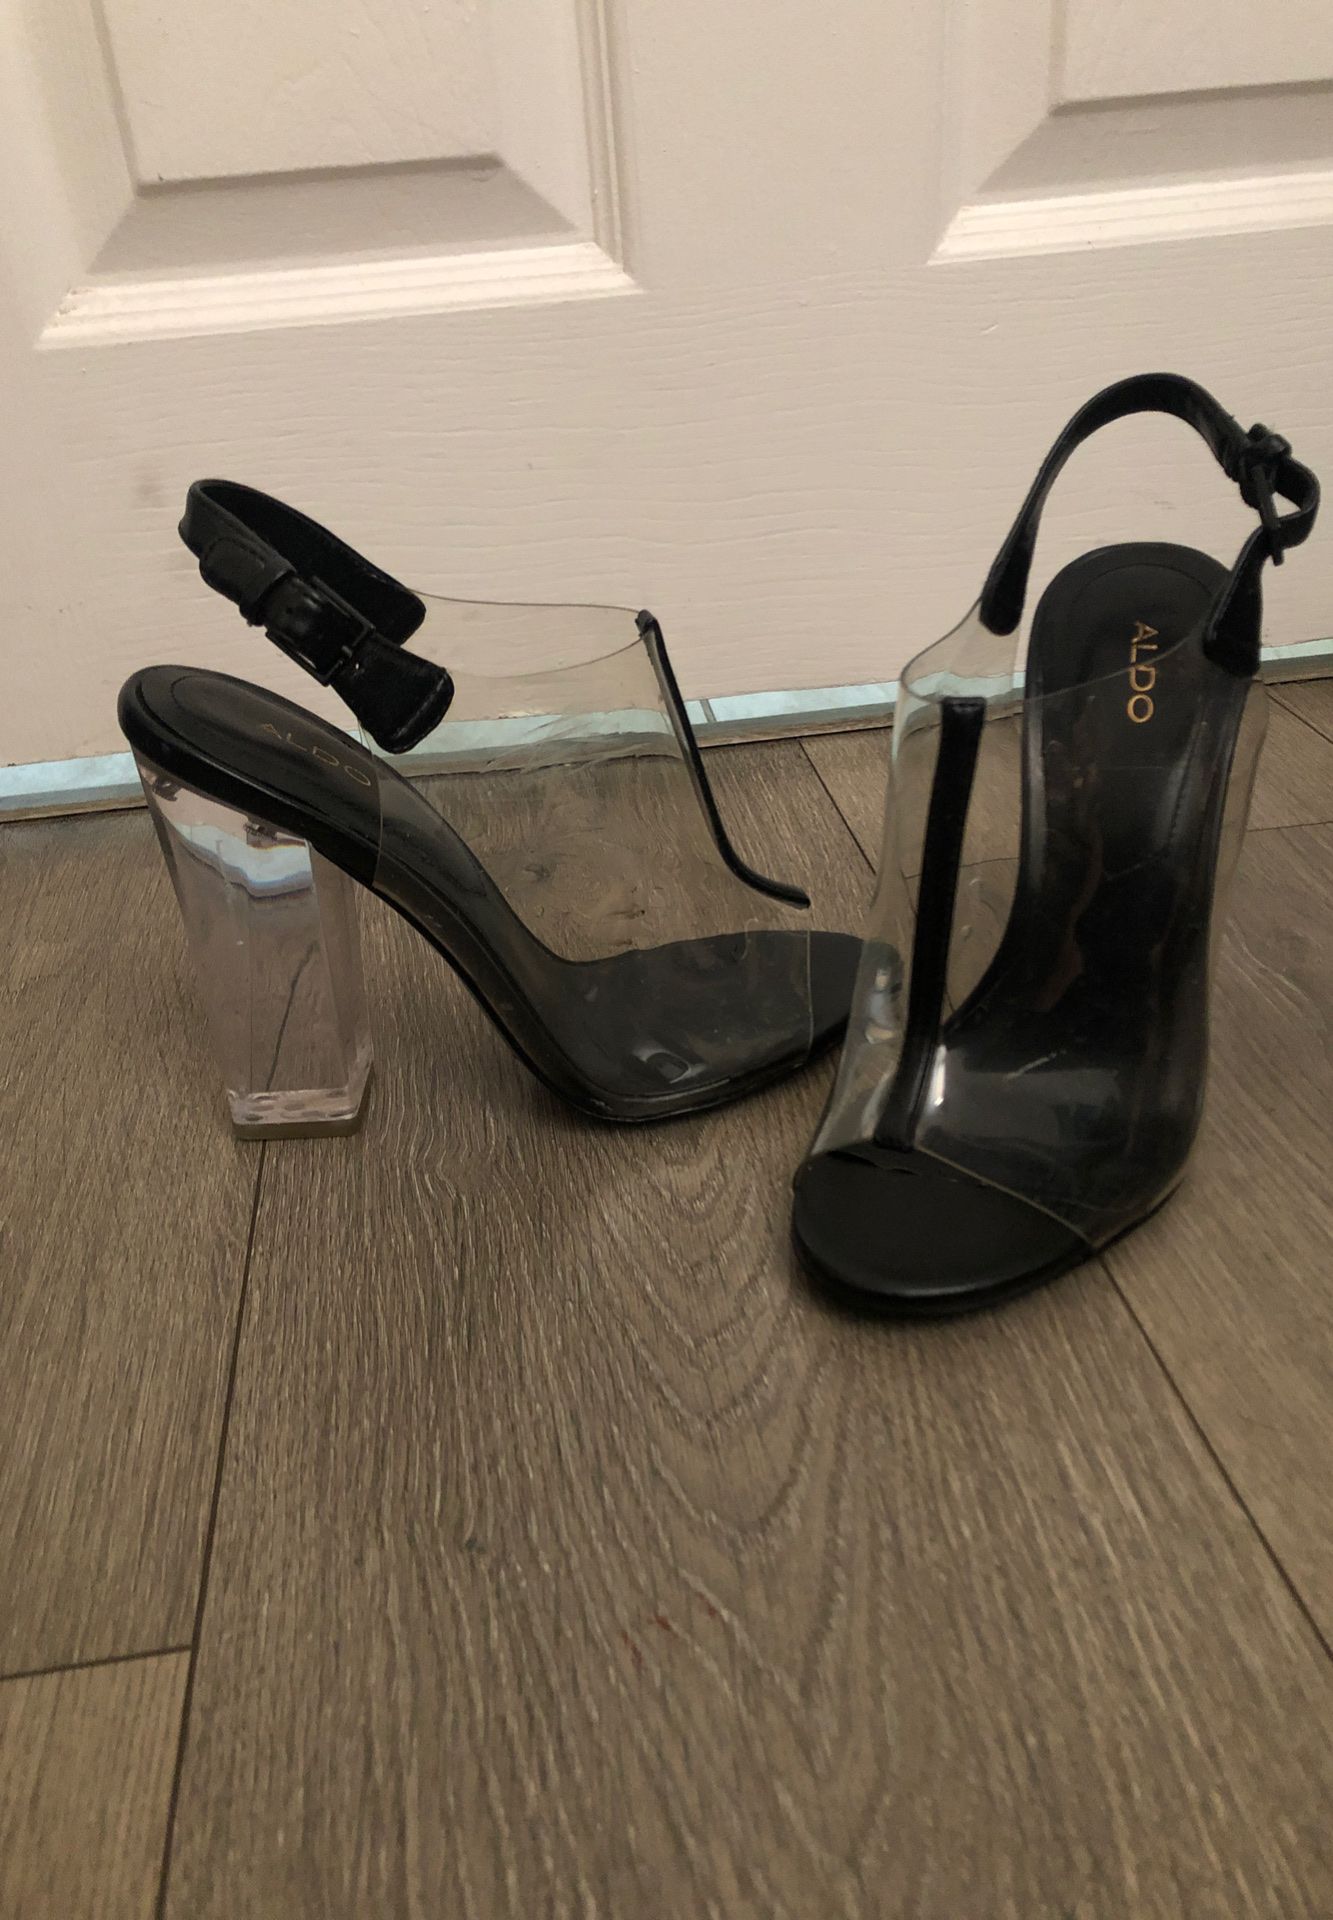 Aldo heels black leather and clear size 6.5